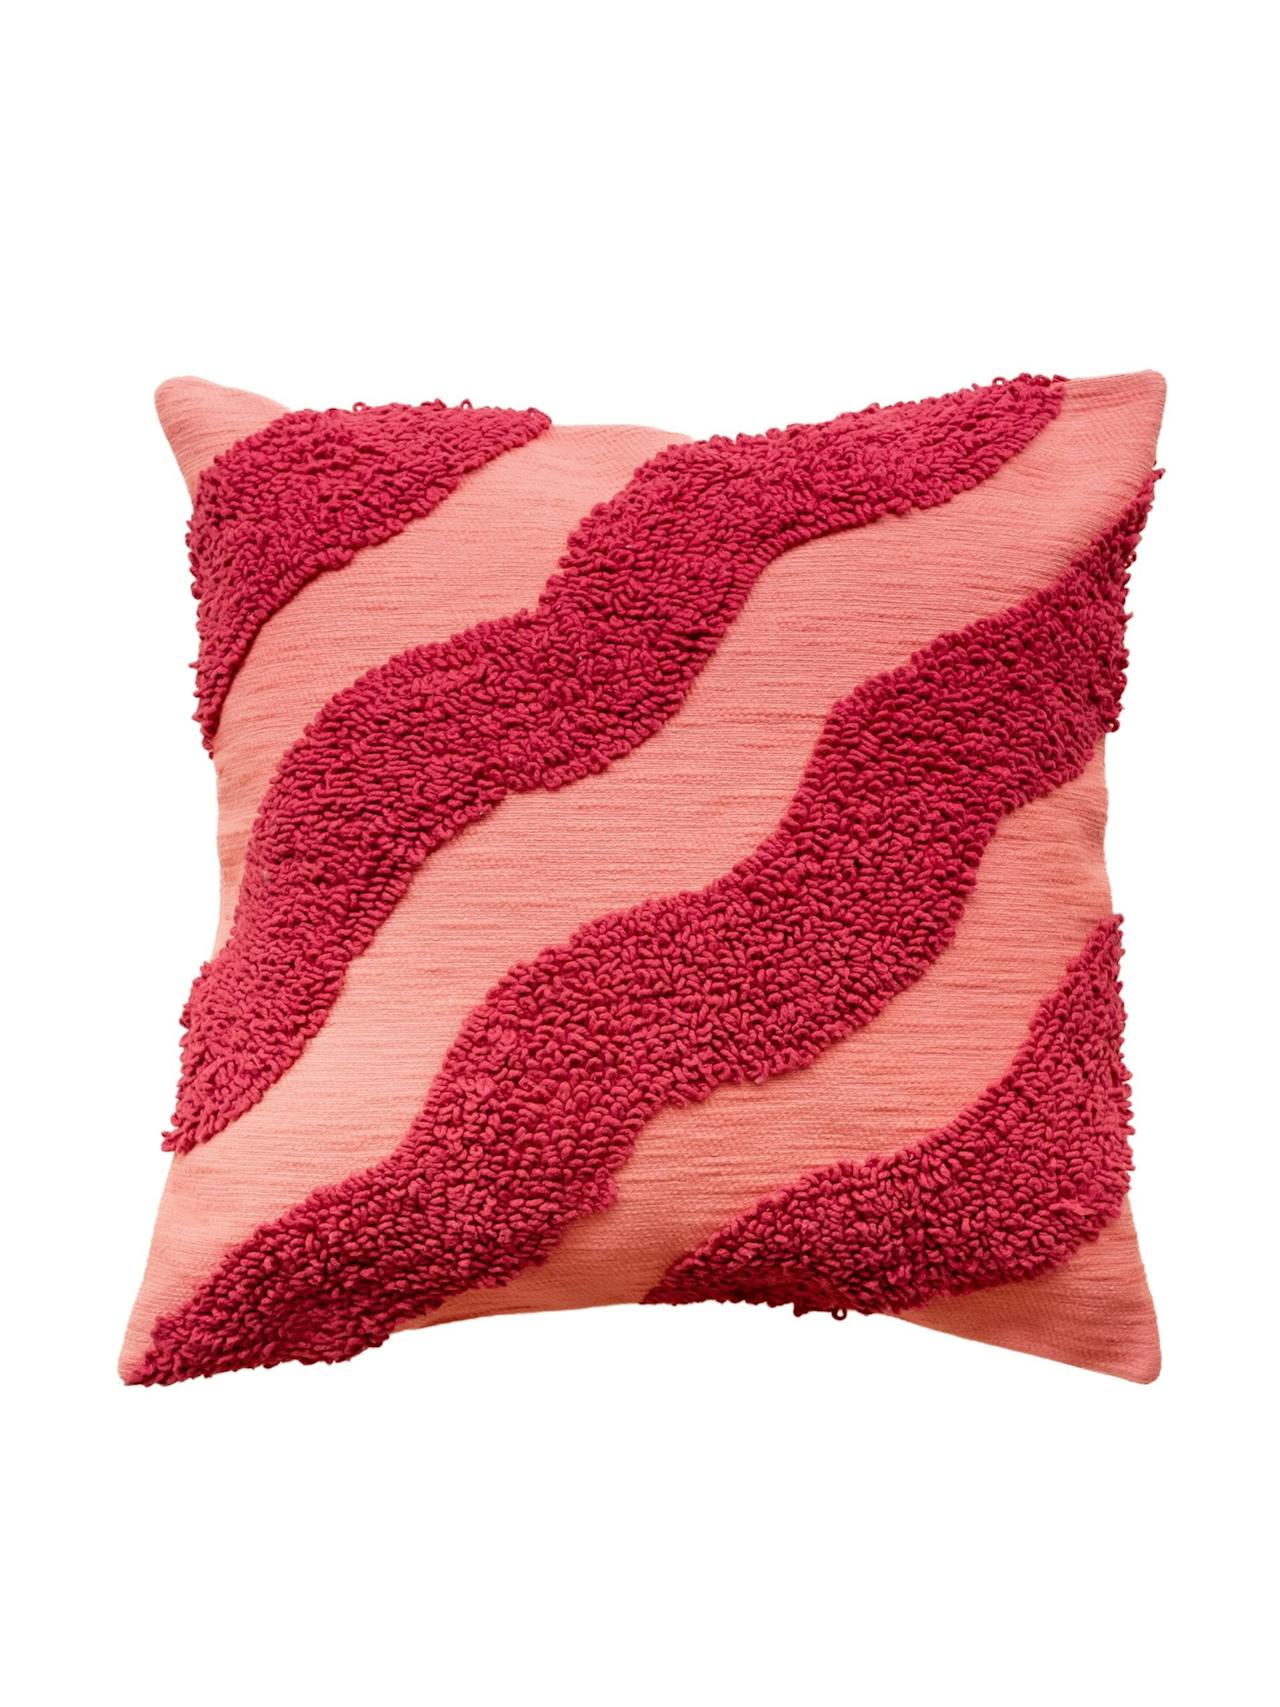 Textured magenta wave cotton cushion cover